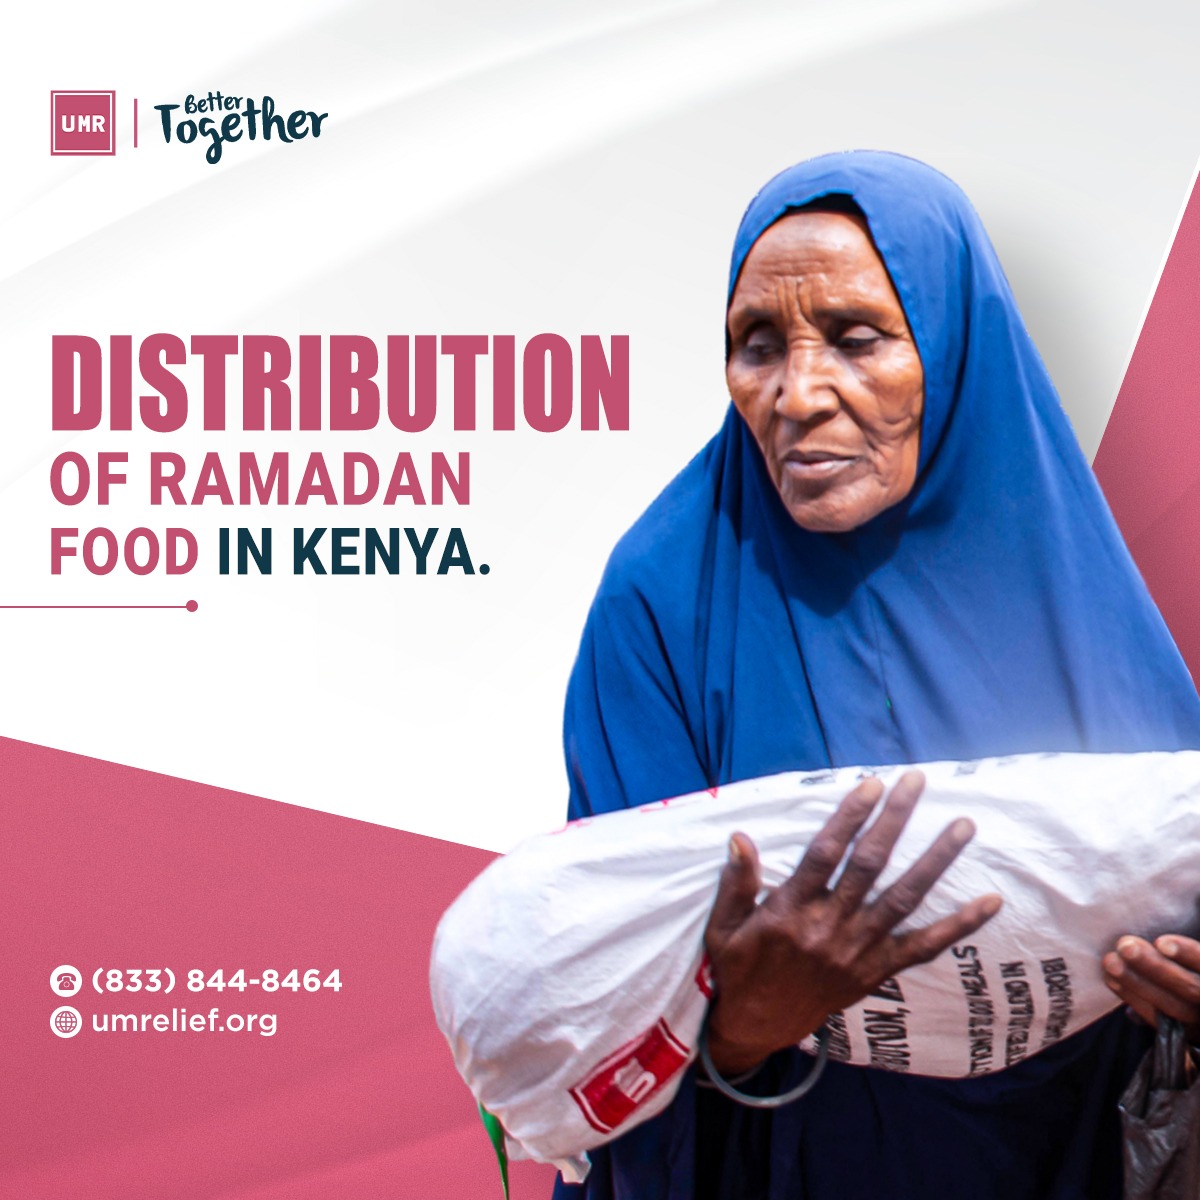 Distributing Ramadan food in Kenya to those in need. Together, let's ensure everyone can celebrate Ramadan with nourishment and blessings. 🌙🍲

#RamadanFoodDistribution #KenyaRelief #DonateNow #UMR #UMRelief